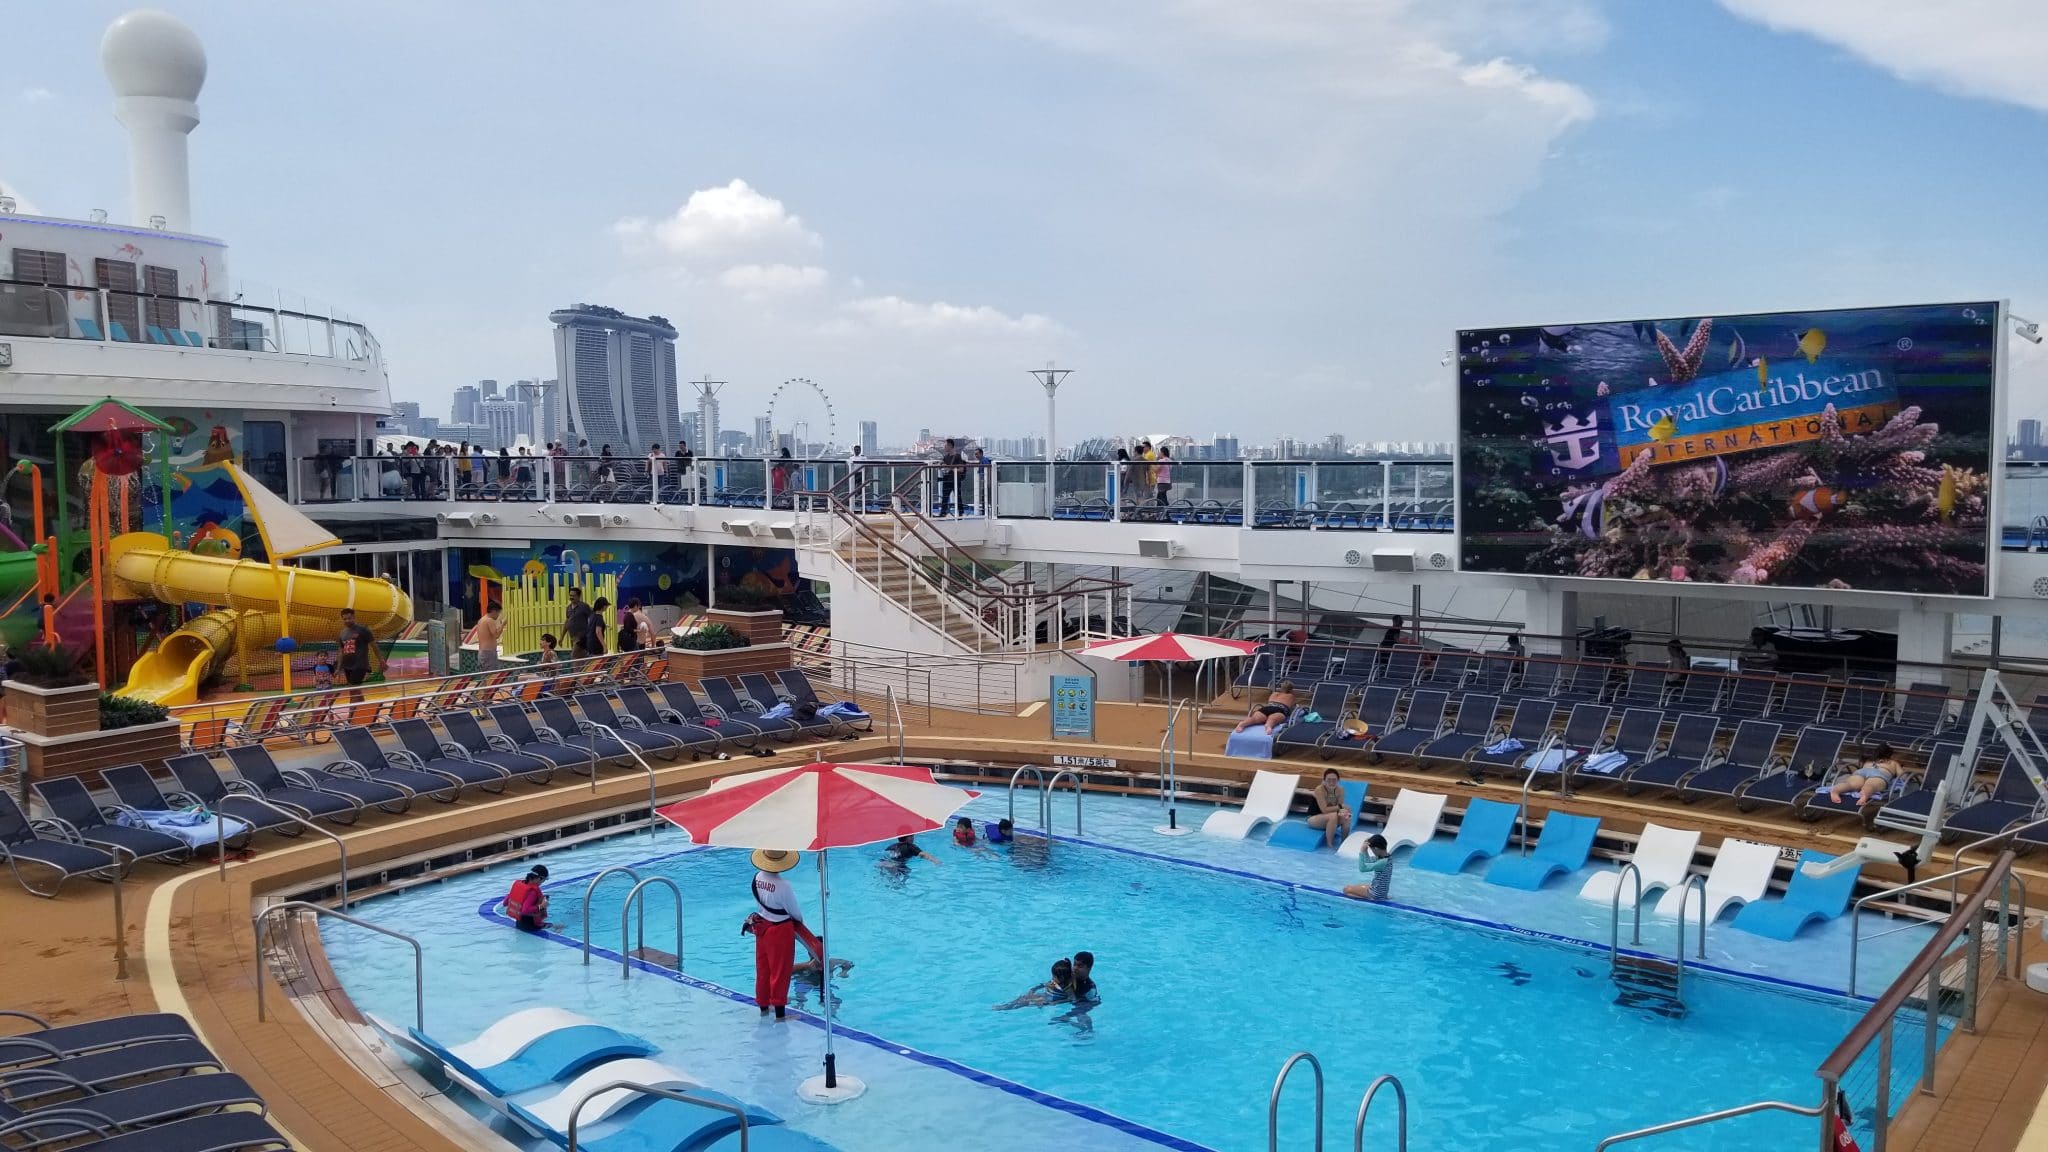 Royal Caribbean cruise ship arrives in Singapore 6 months early